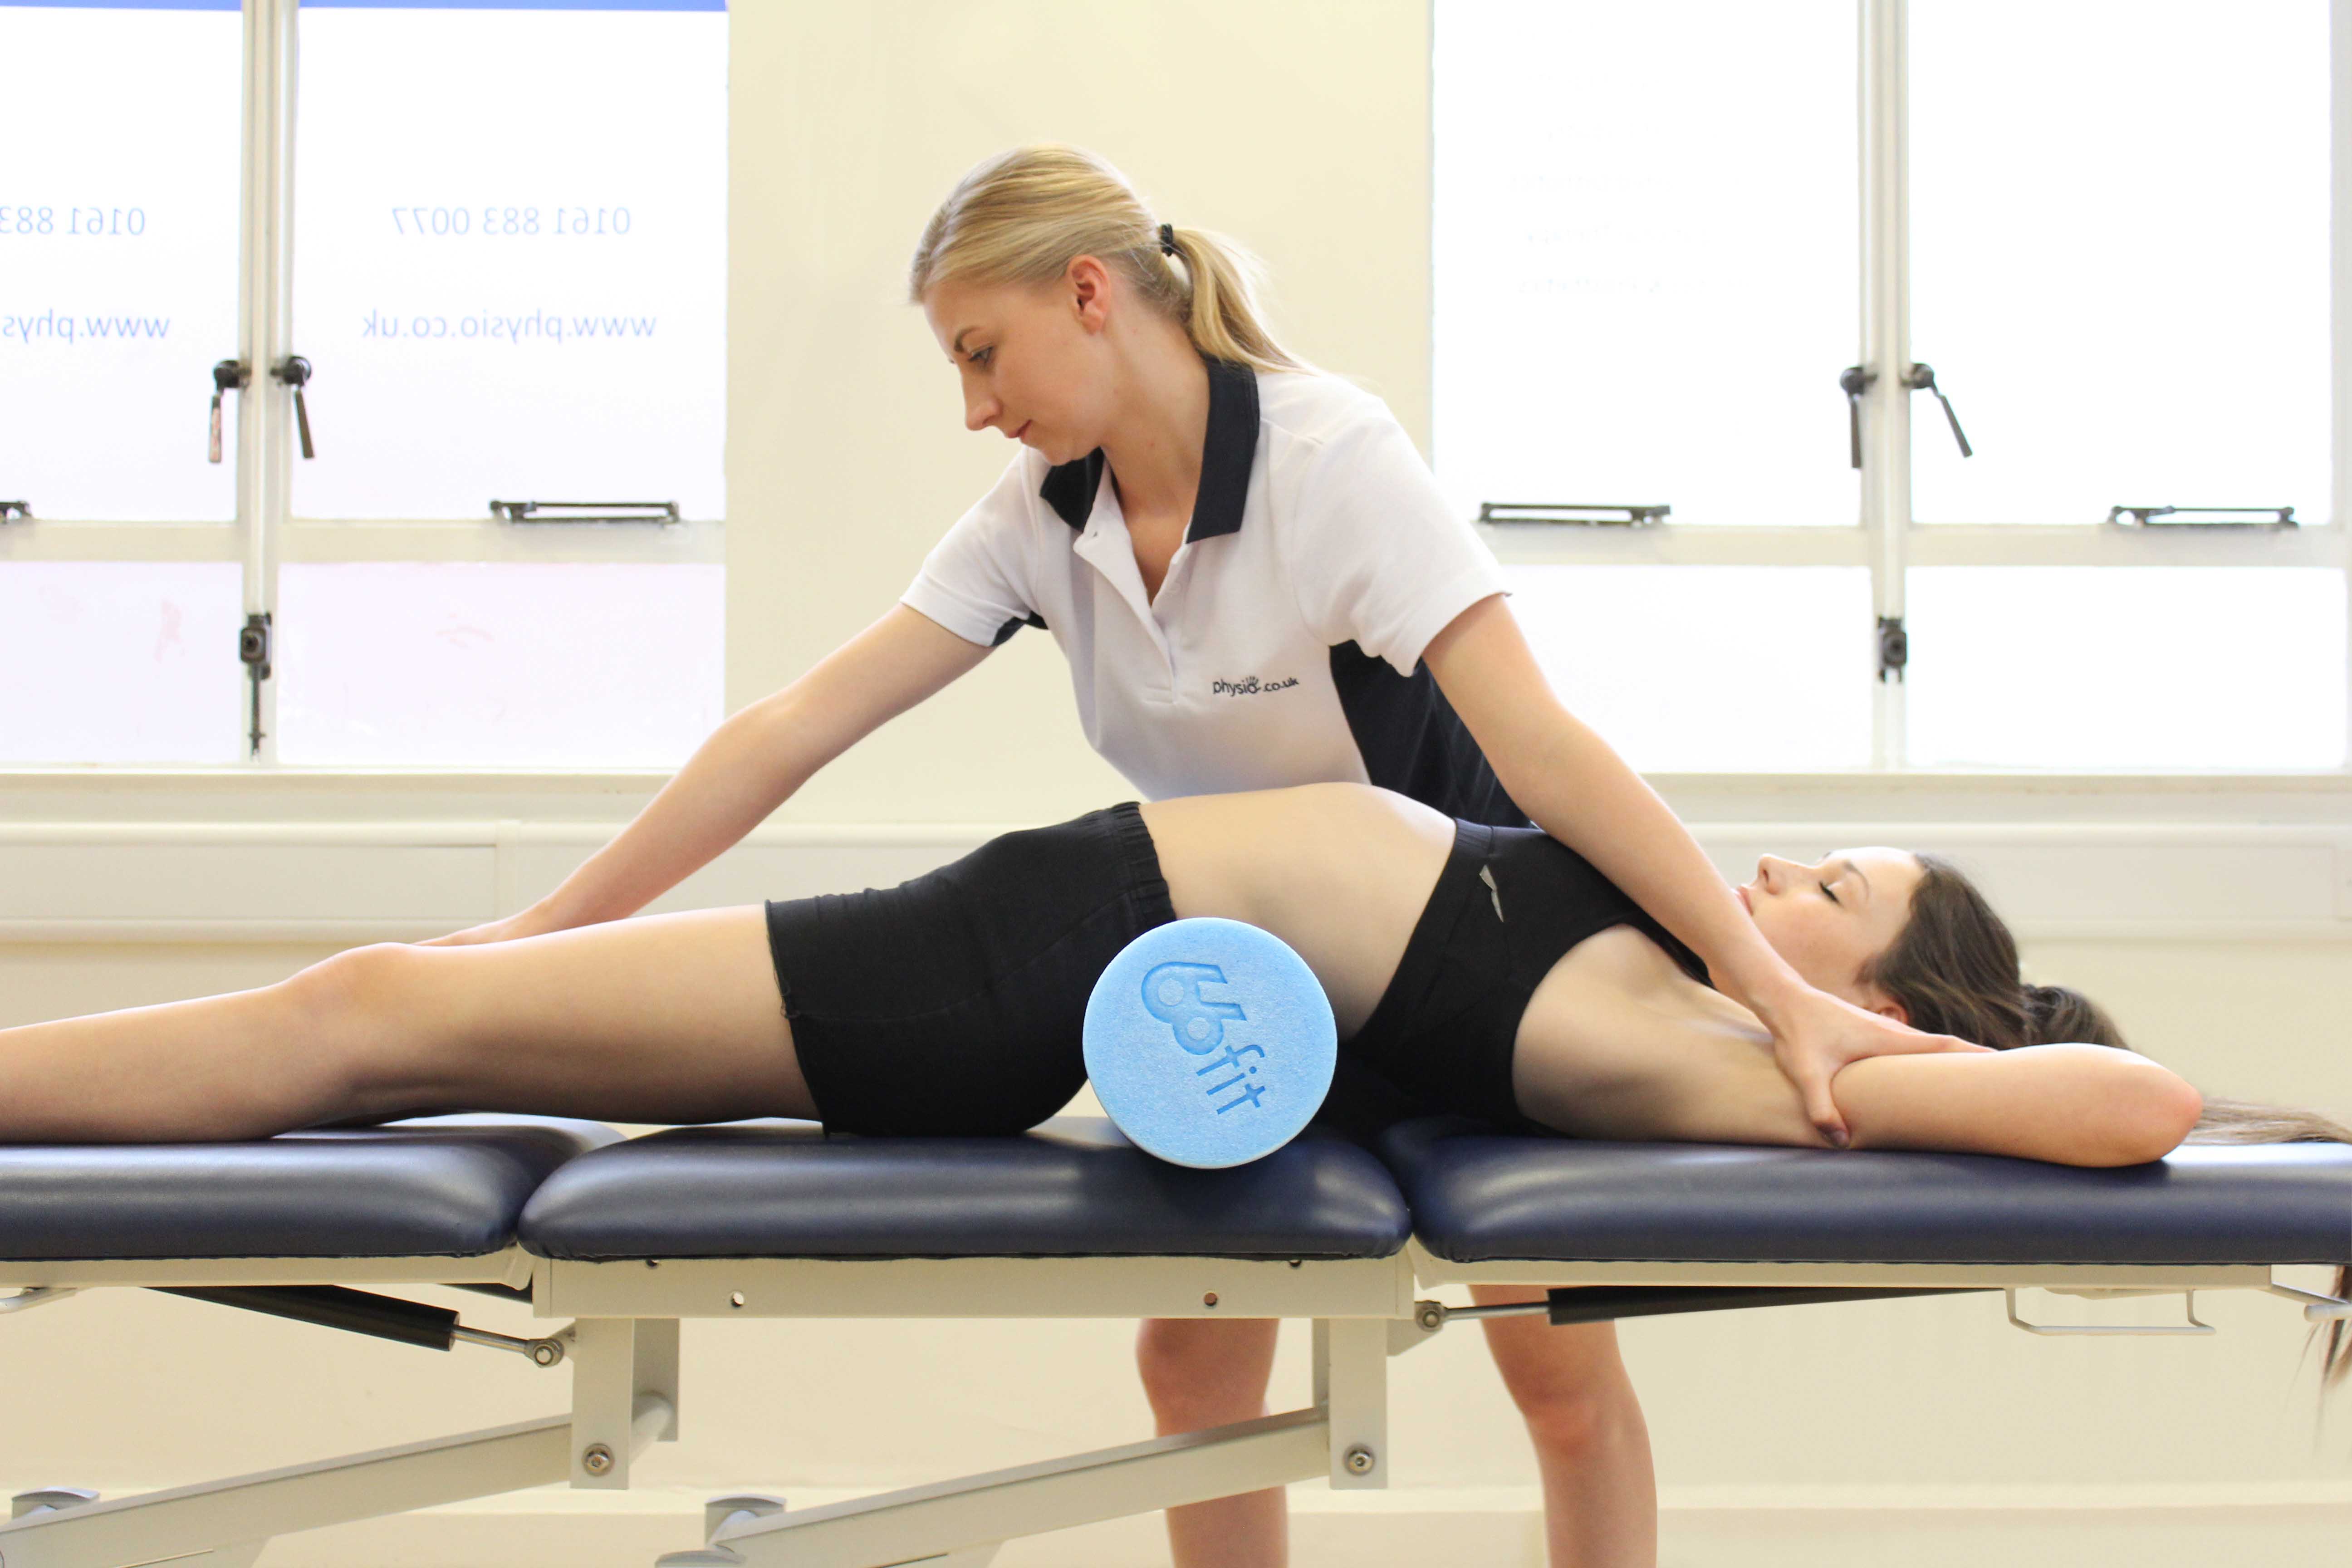 Sport rehabilitation exercises supervised by an experienced physiotherapist